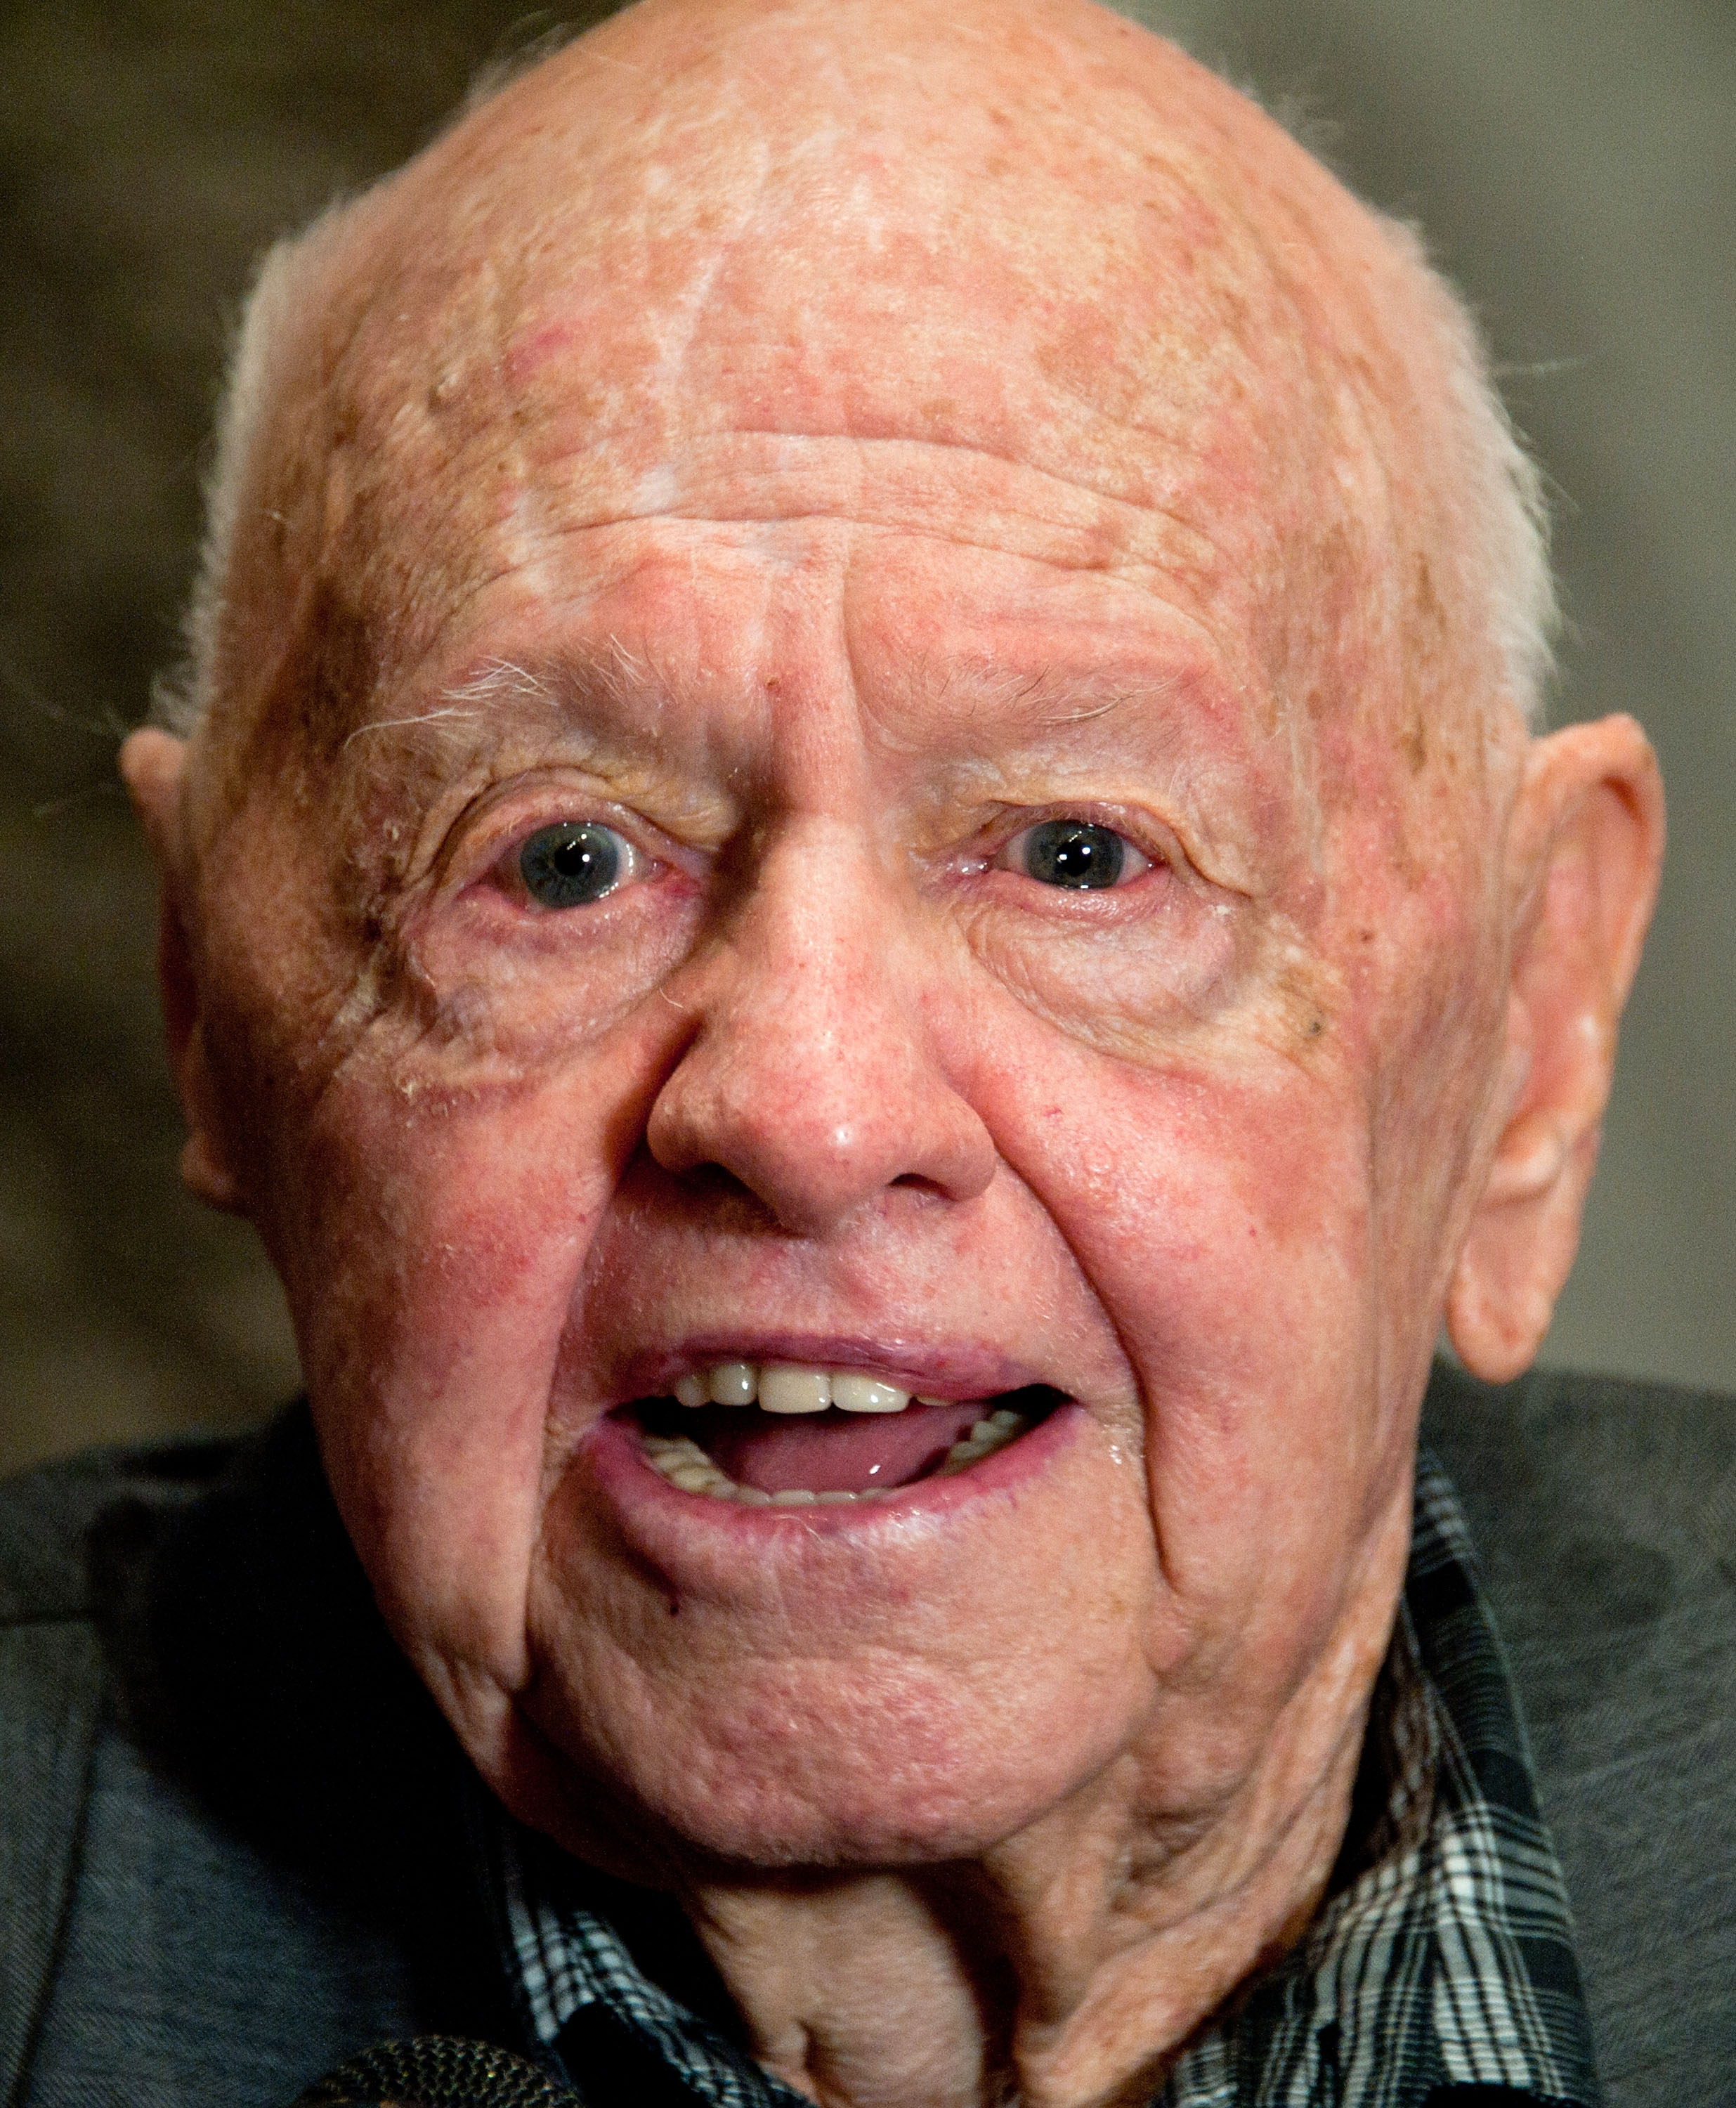 Mickey Rooney during the AMPAS The Last 70mm Film Festival Series at the Academy of Motion Picture Arts and Sciences on July 9, 2012 in Beverly Hills, California. | Source: Getty Images